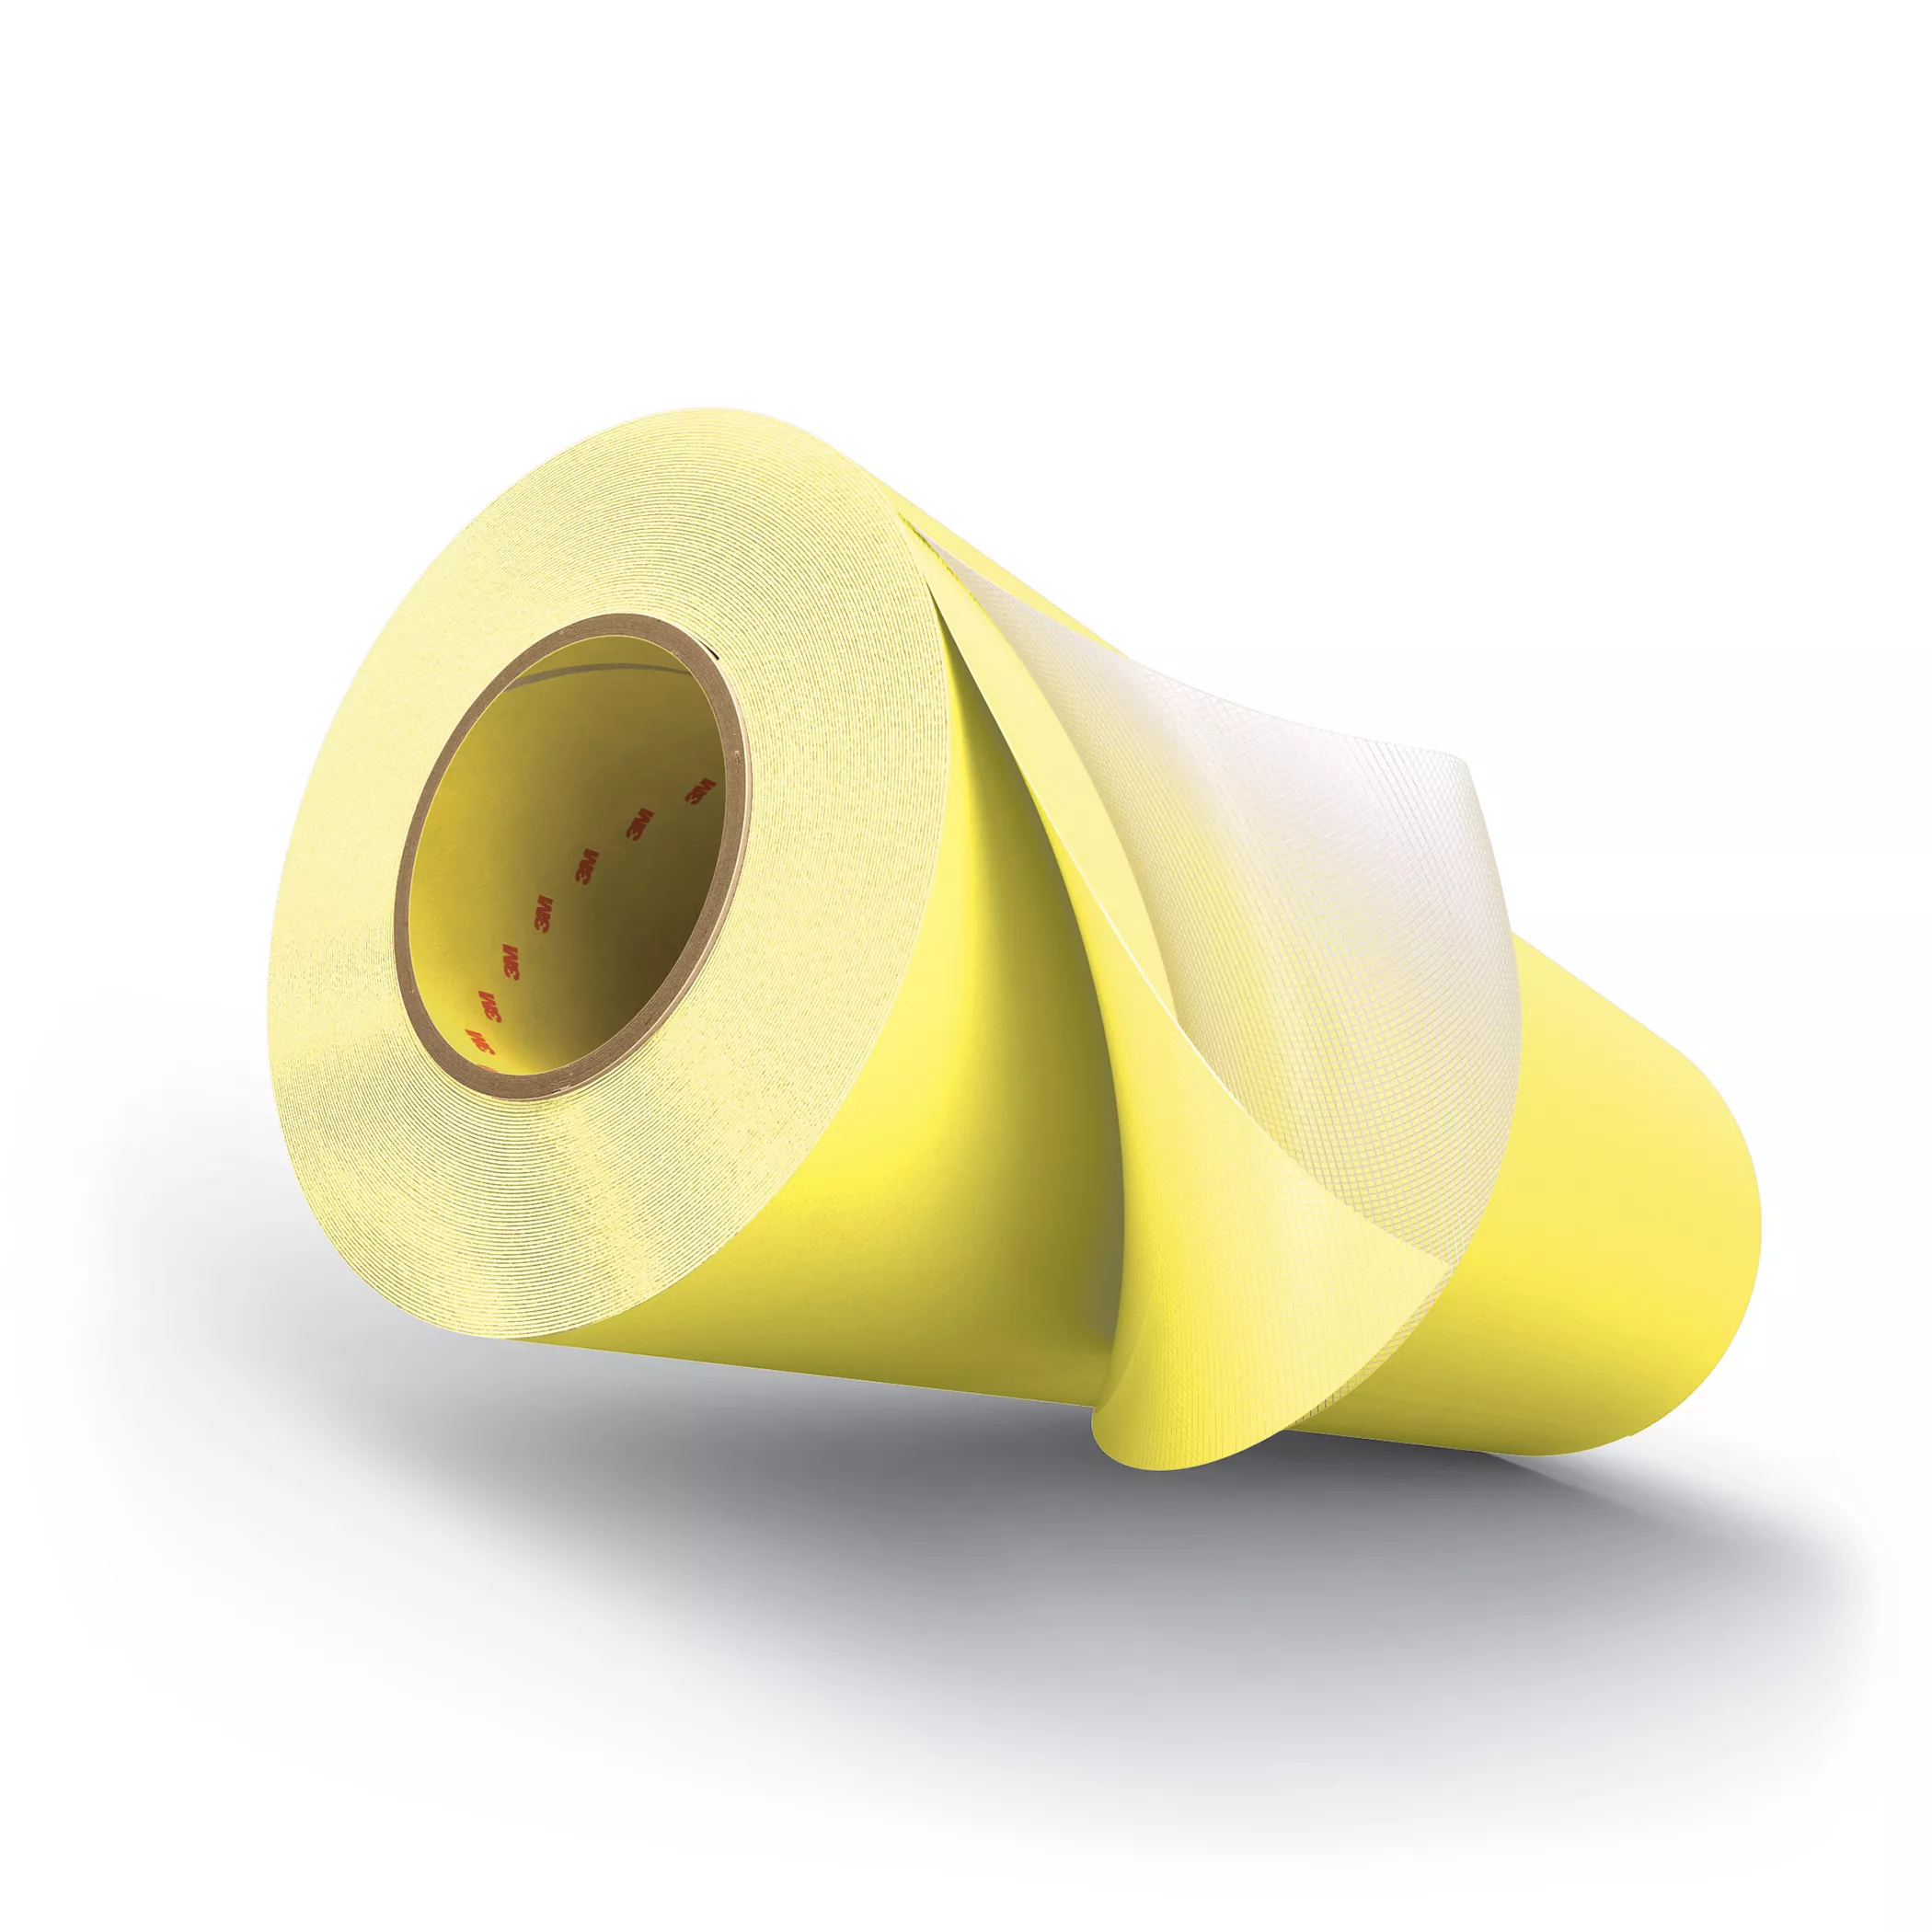 3M™ Cushion-Mount™ Plus Plate Mounting Tape E1320, Yellow, 18 in x 25
yd, 20 mil, 1 Roll/Case